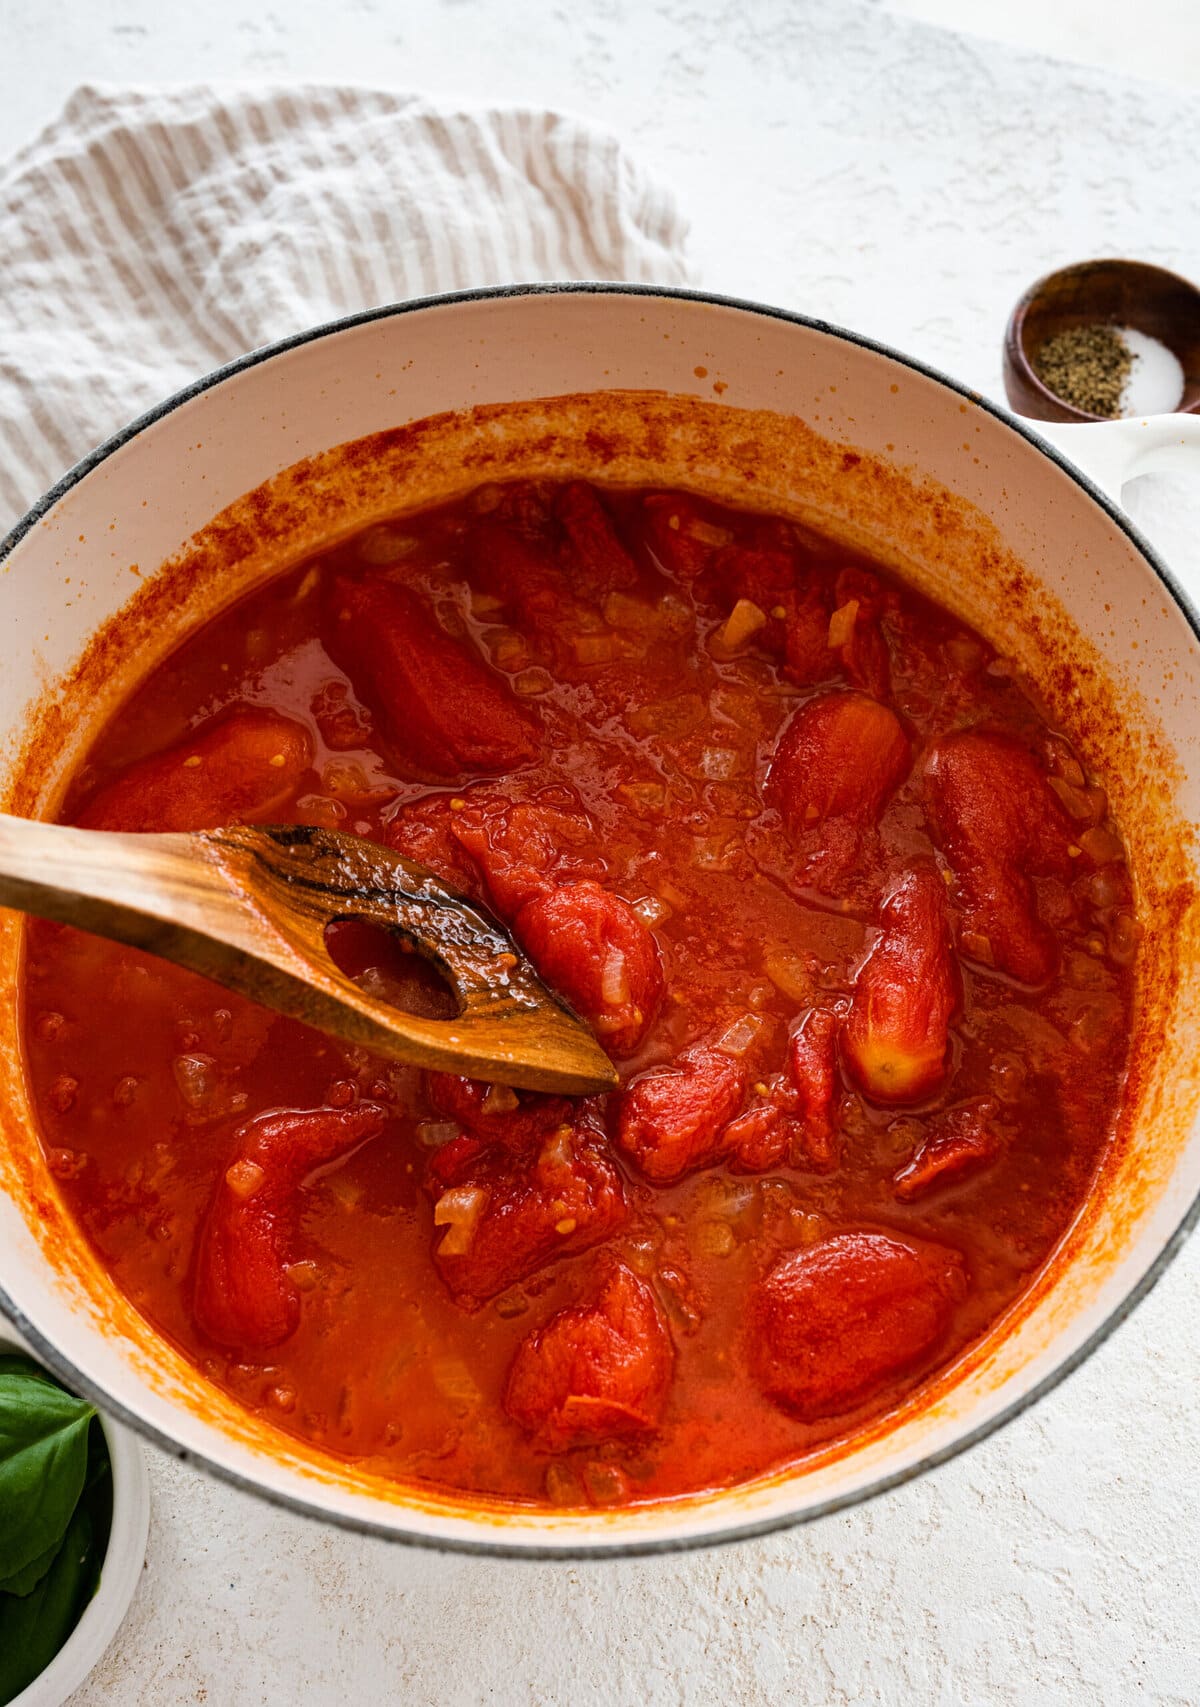 how to make sugo al pomodoro step-by-step photos: smashing the whole canned tomatoes with a wooden spoon.